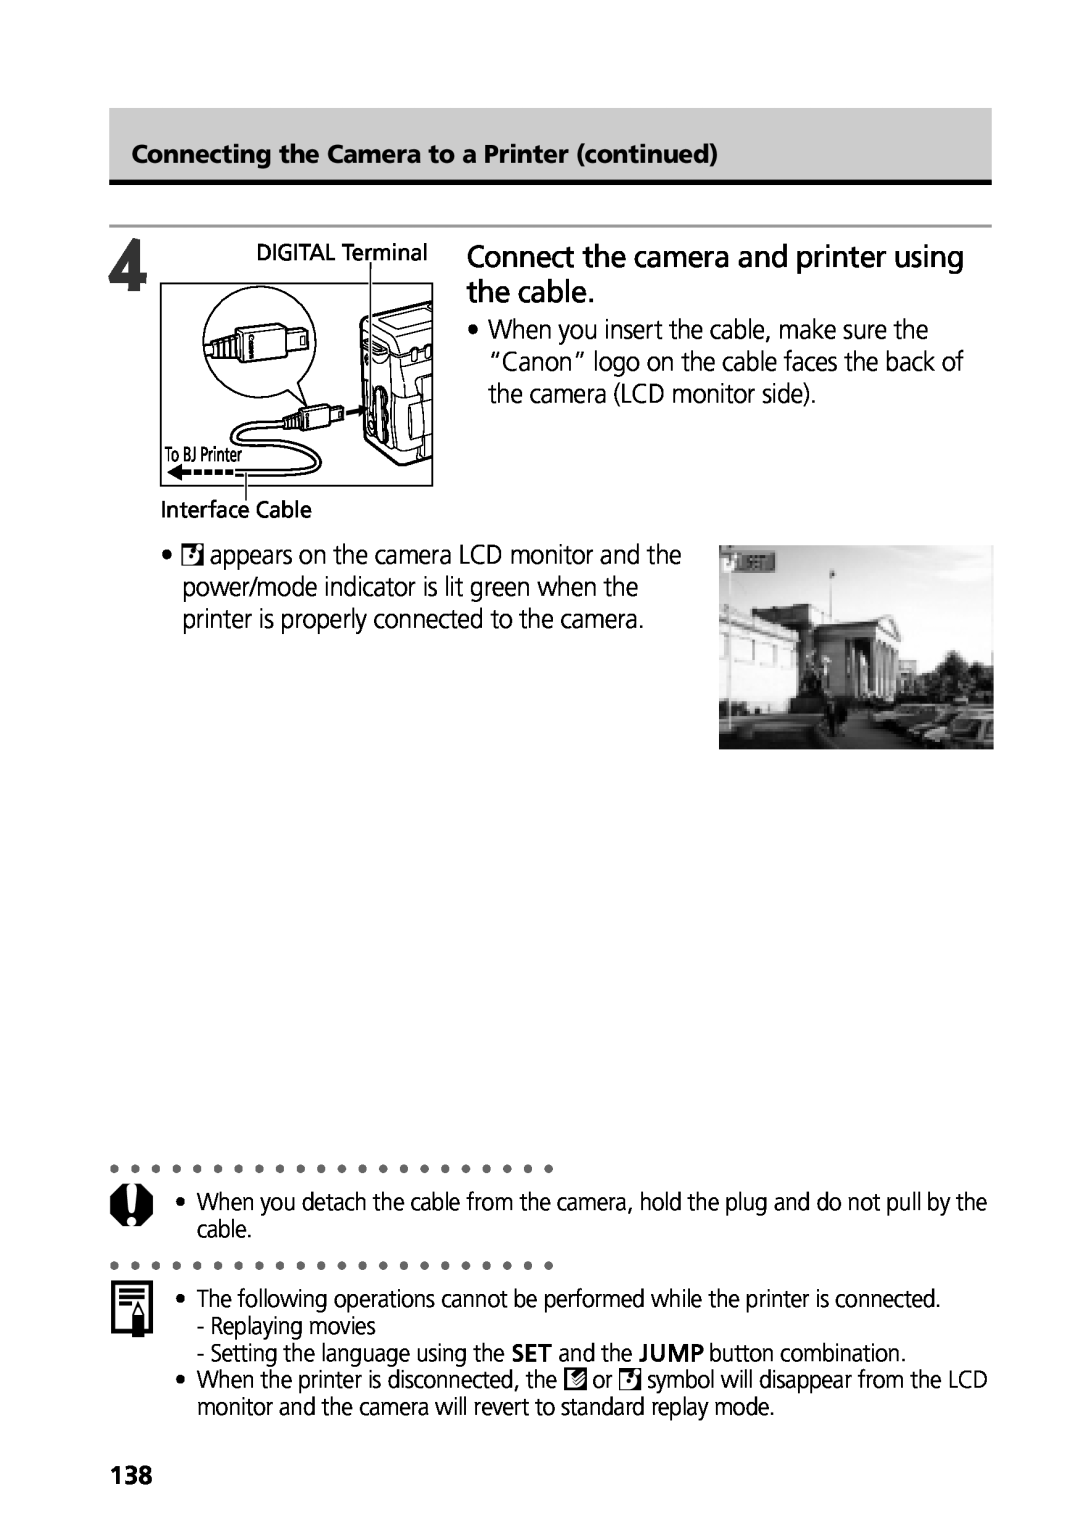 Canon G3 manual Connect the camera and printer using the cable, Connecting the Camera to a Printer continued 